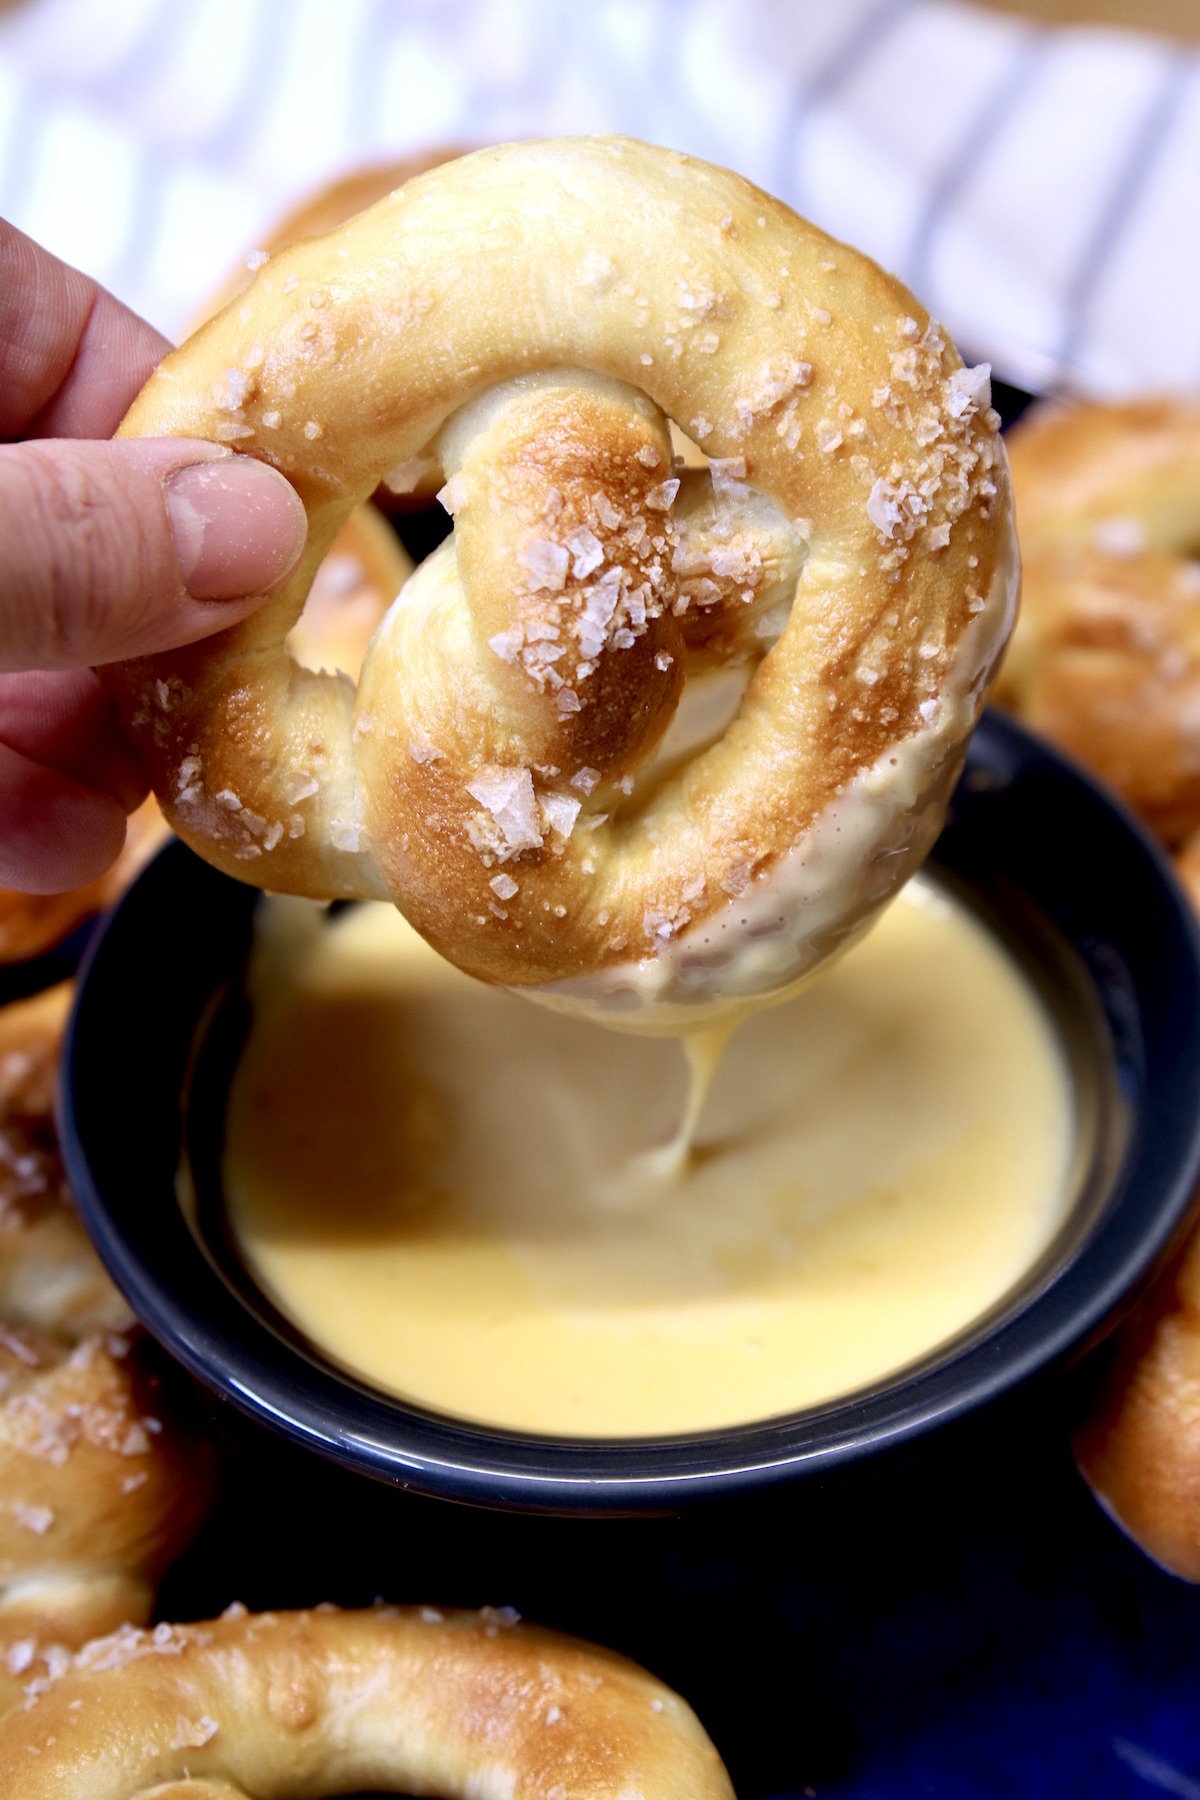 Soft pretzel dipping into cheese sauce